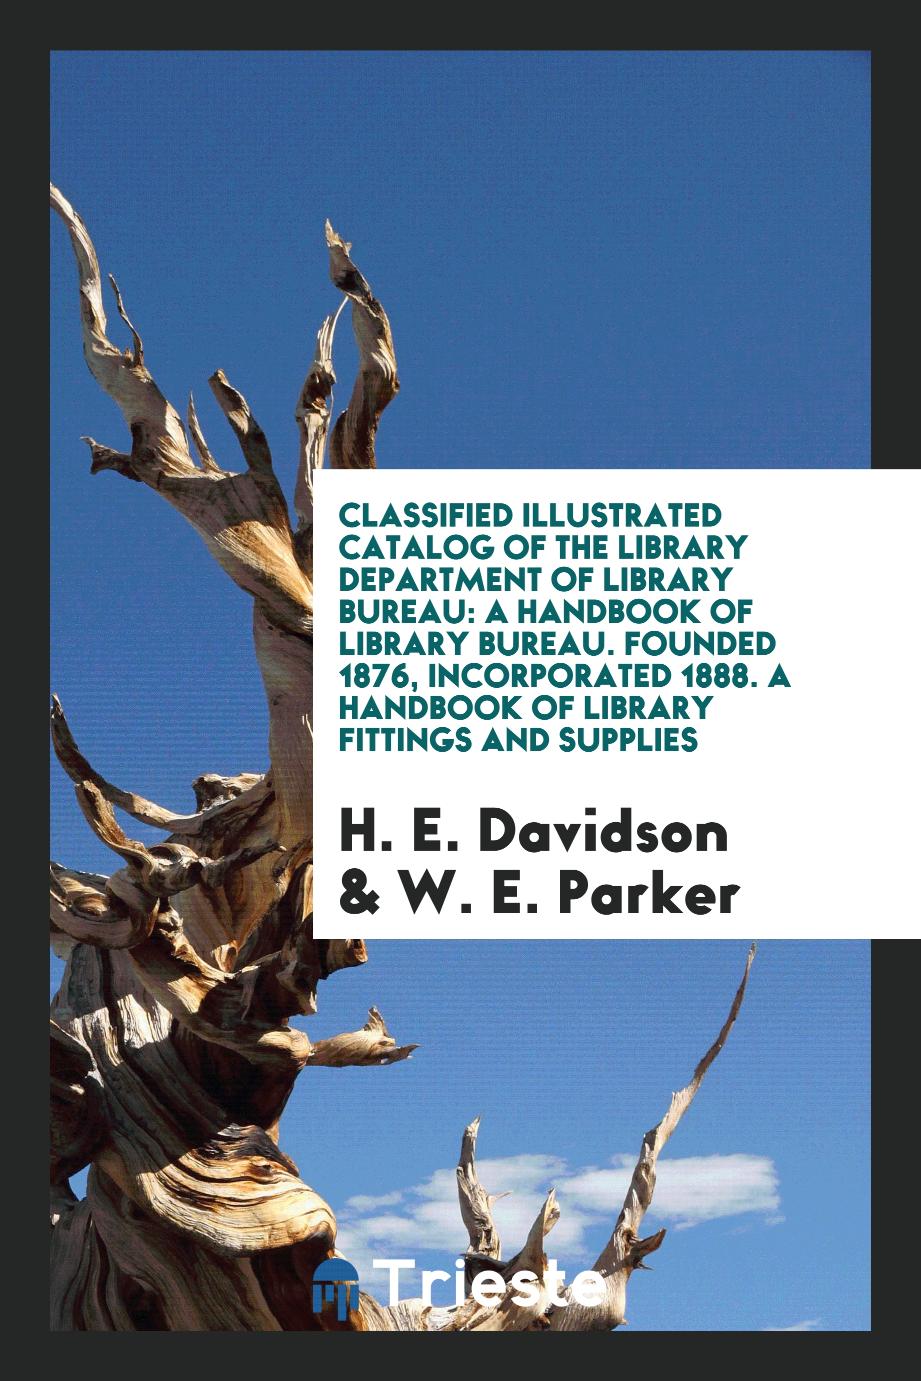 Classified Illustrated Catalog of the Library Department of Library Bureau: A Handbook of Library Bureau. Founded 1876, Incorporated 1888. A handbook of Library Fittings and Supplies